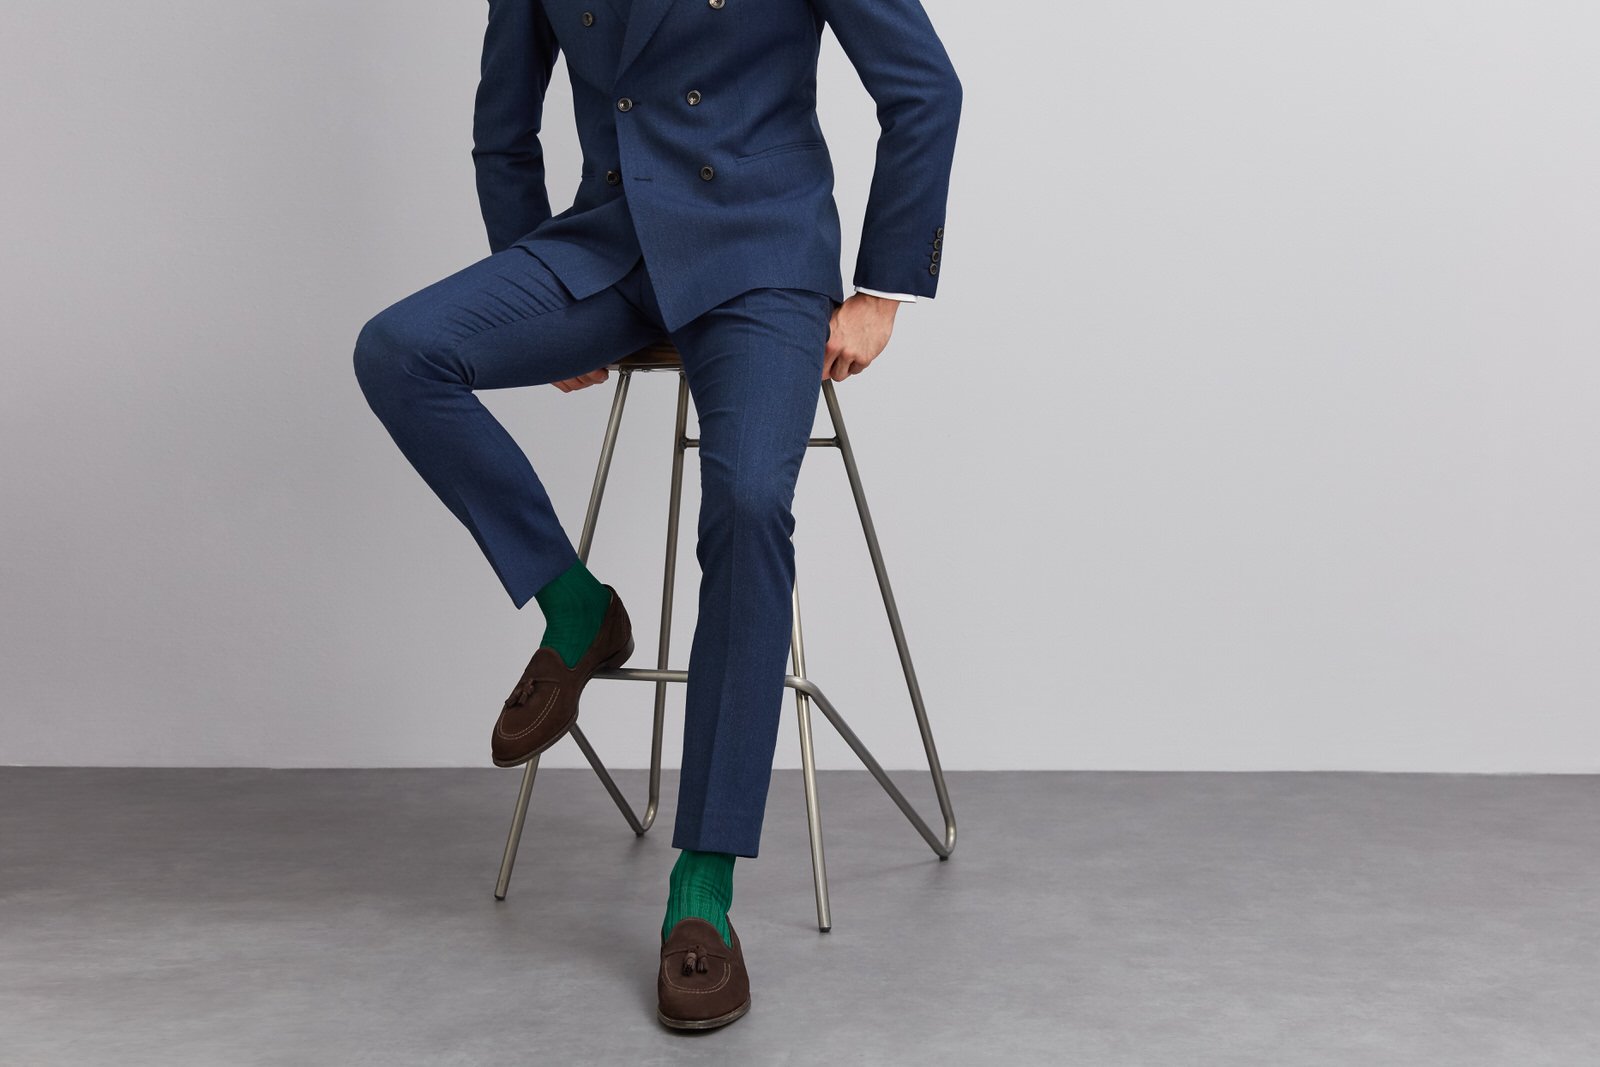 Man in blue suit with bright green socks